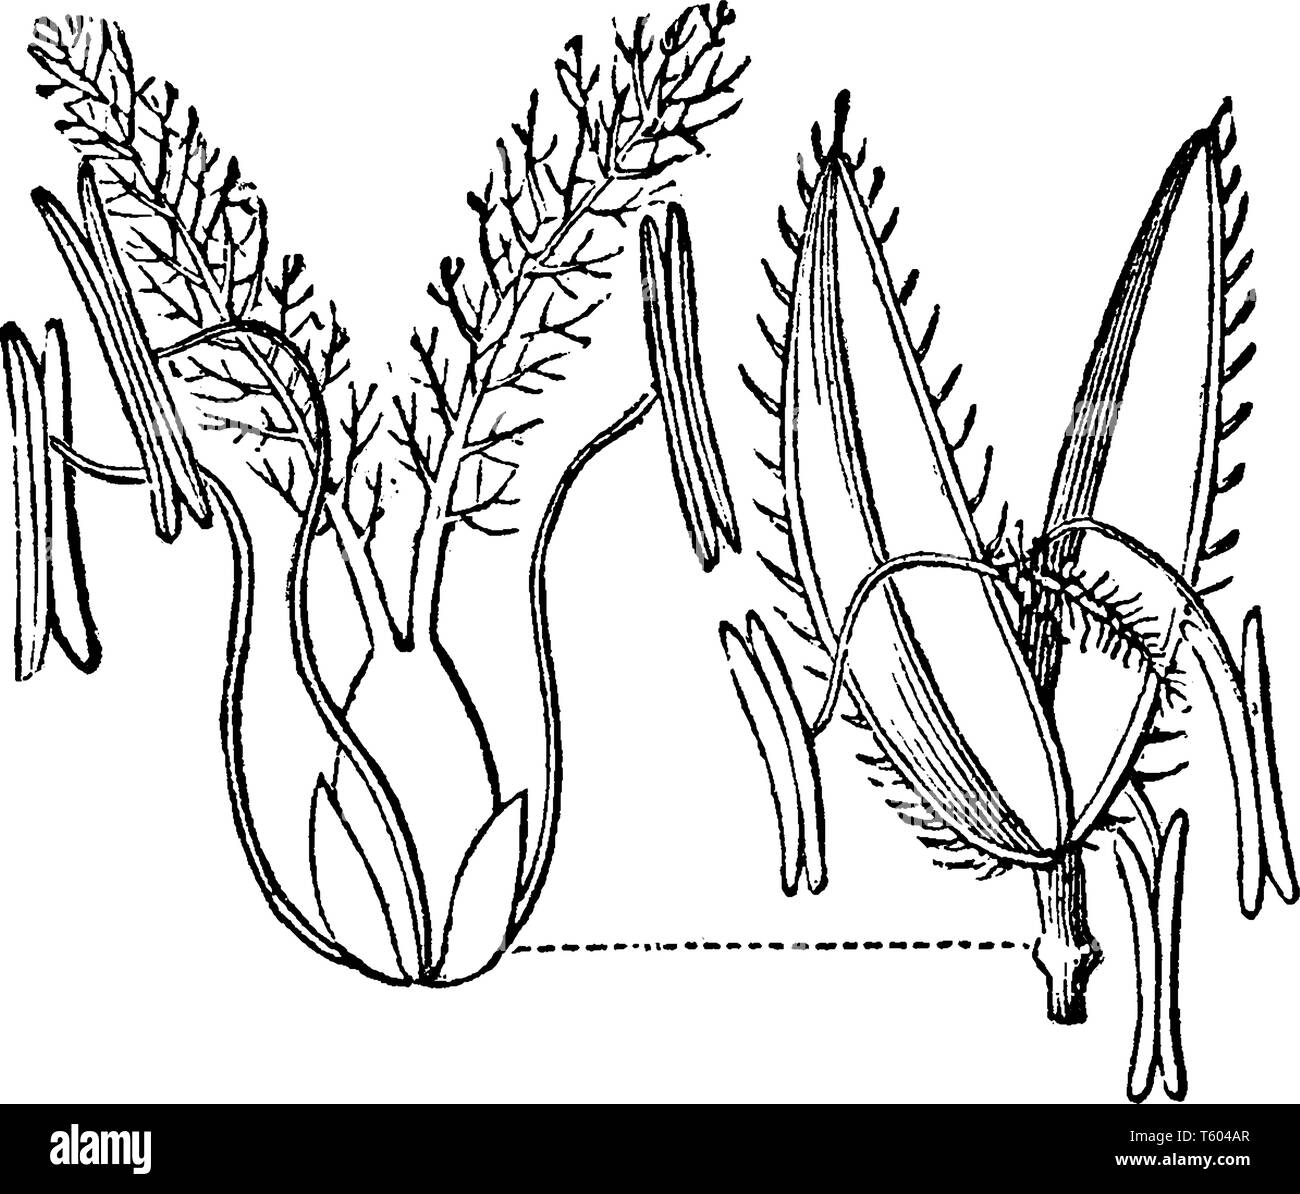 Rice Cutgrass is 2-3' tall and the leaves are narrow, very rough to touch and small sharply-toothed leaf margins, vintage line drawing or engraving il Stock Vector